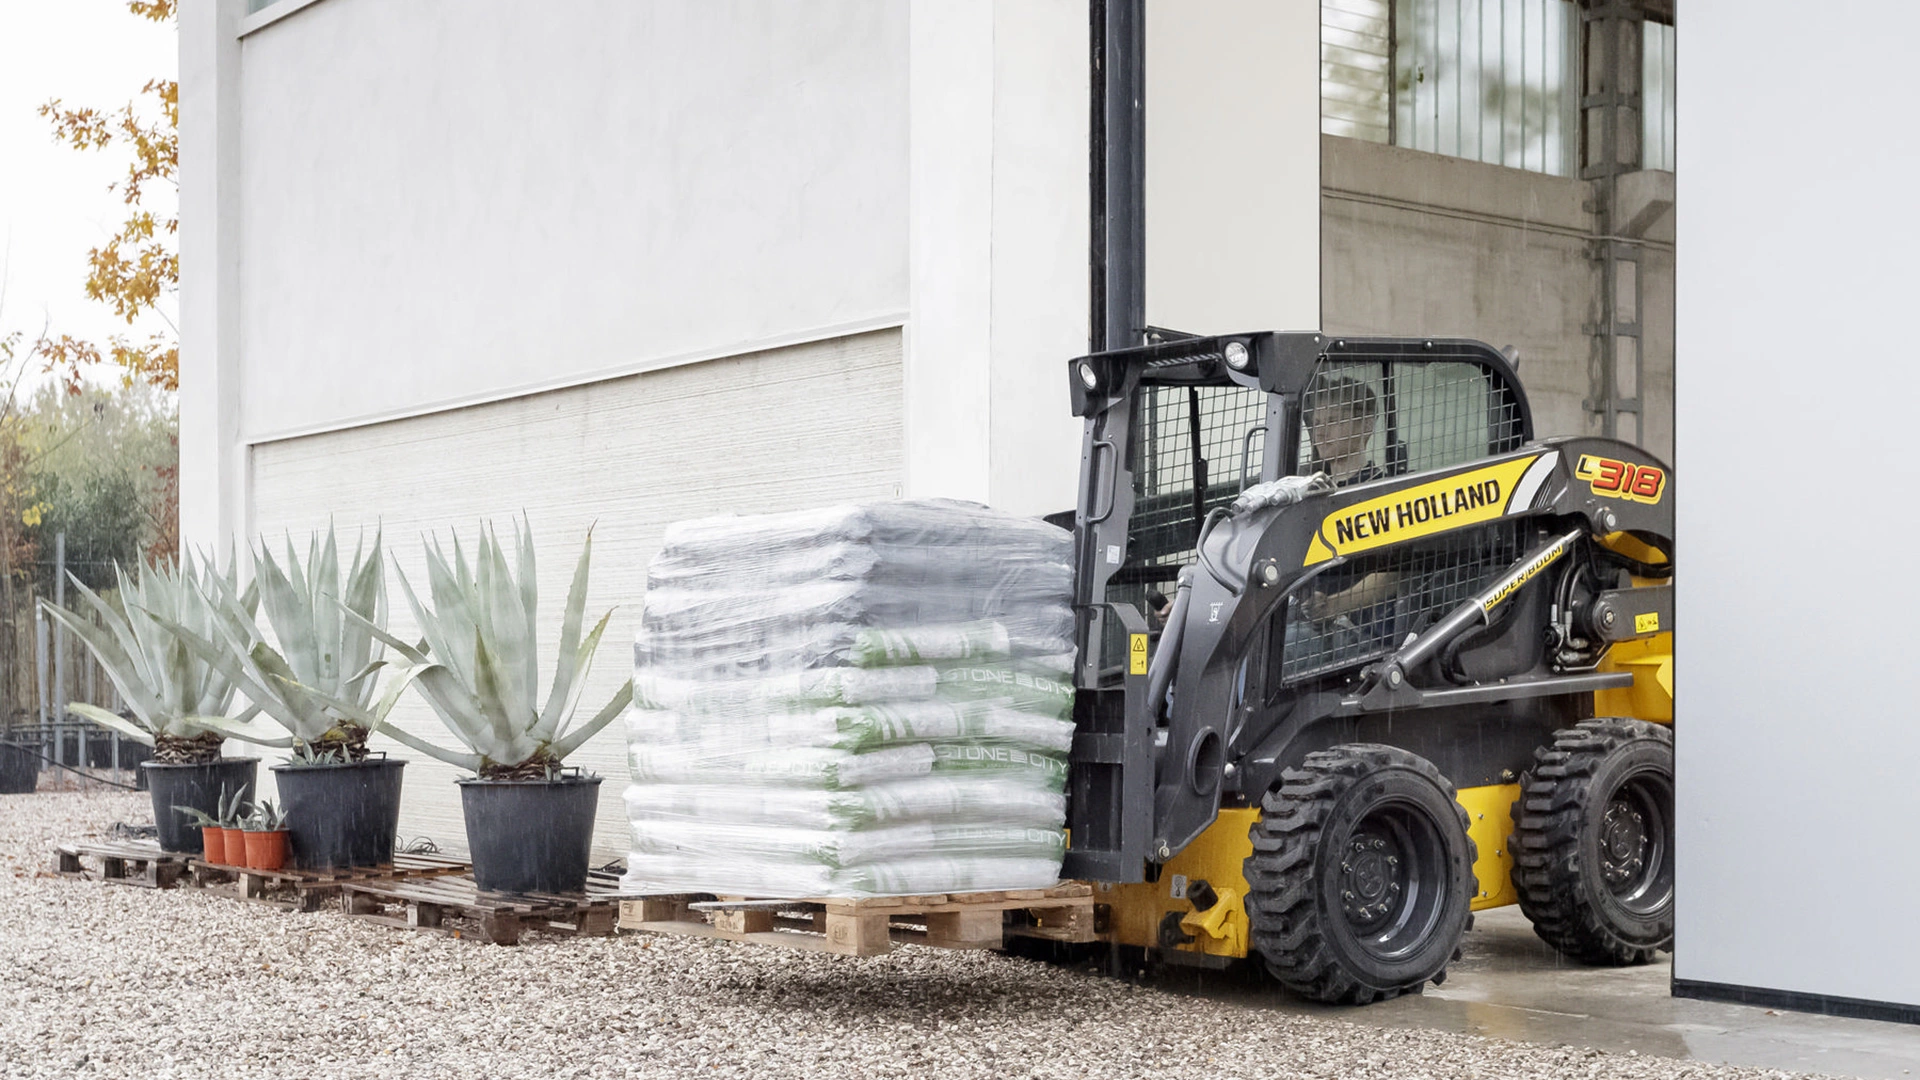 A New Holland skid steer loader in a garden setting, lifting a pallet of soil bags.